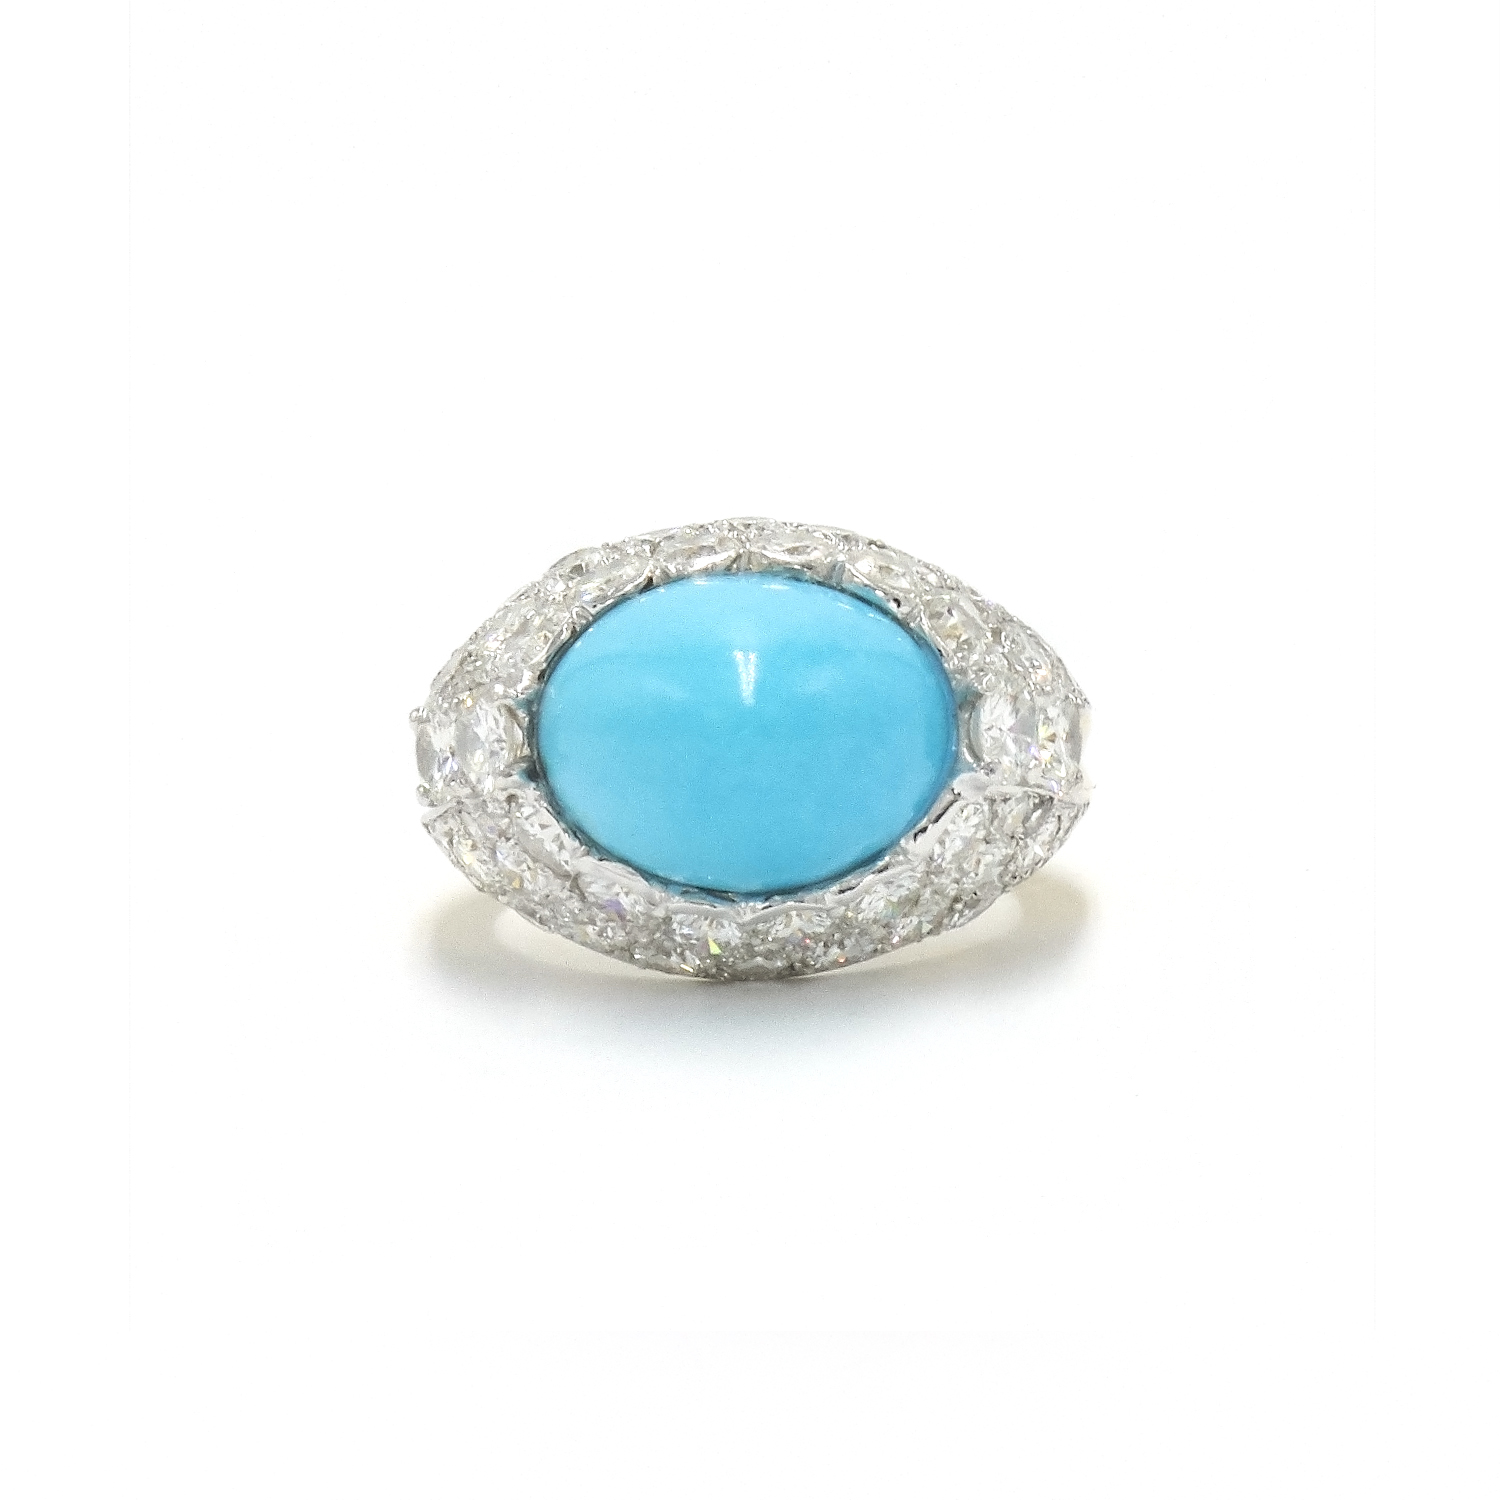 1960s Turquoise and Diamond Ring by Cartier Style R-40241-FL-0-0